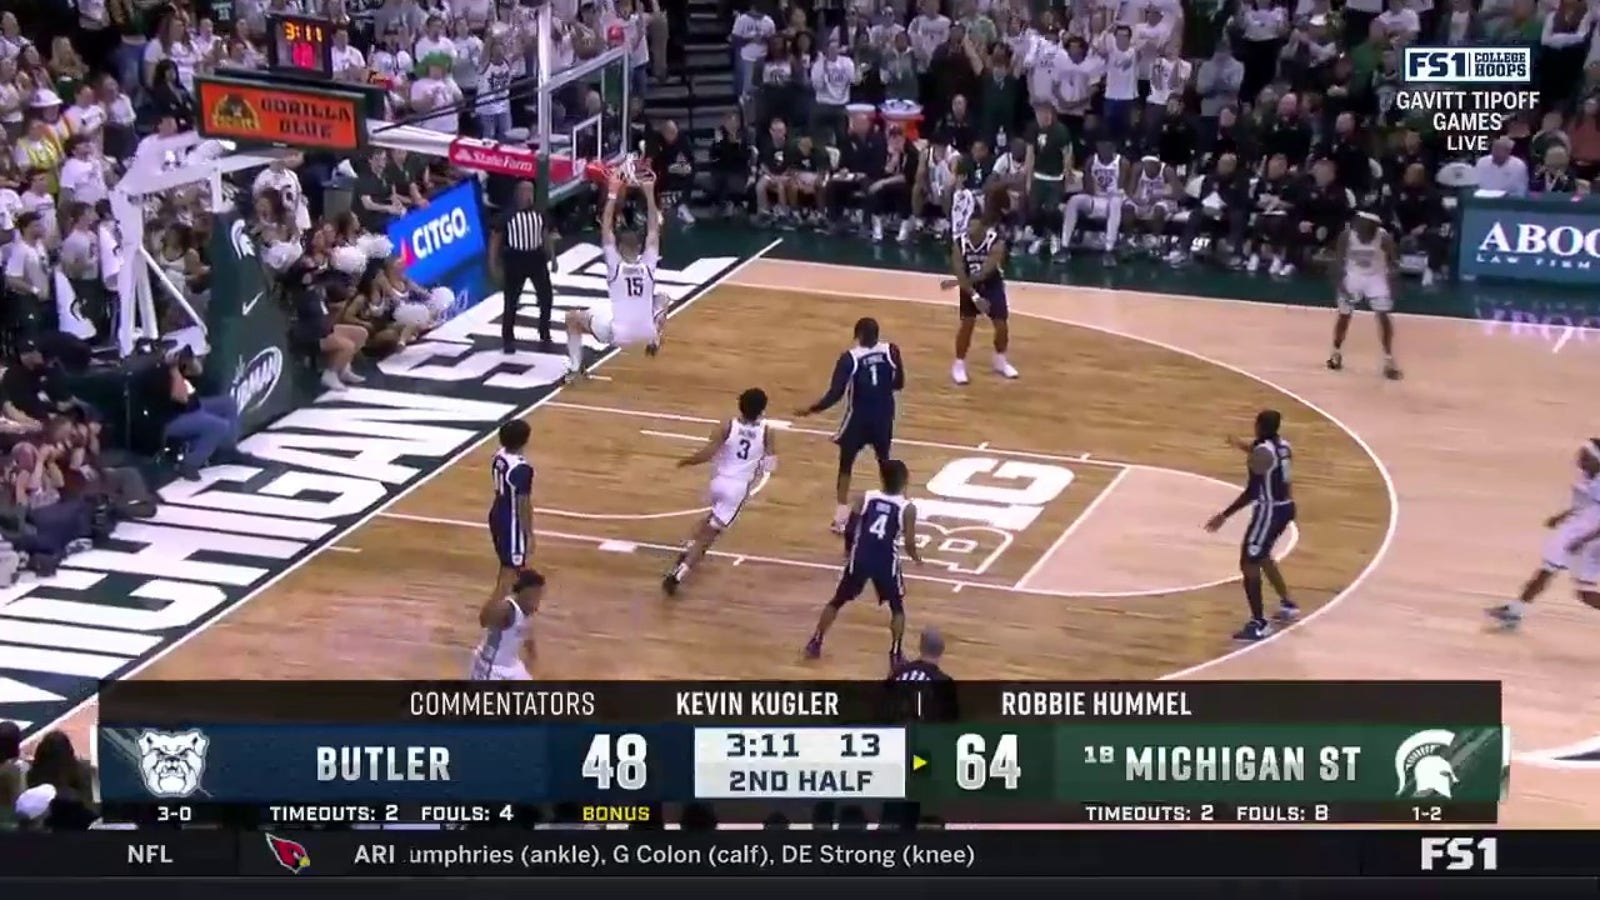 Carson Cooper finishes with the strong two-handed slam as Michigan State dominates Butler, 74-54